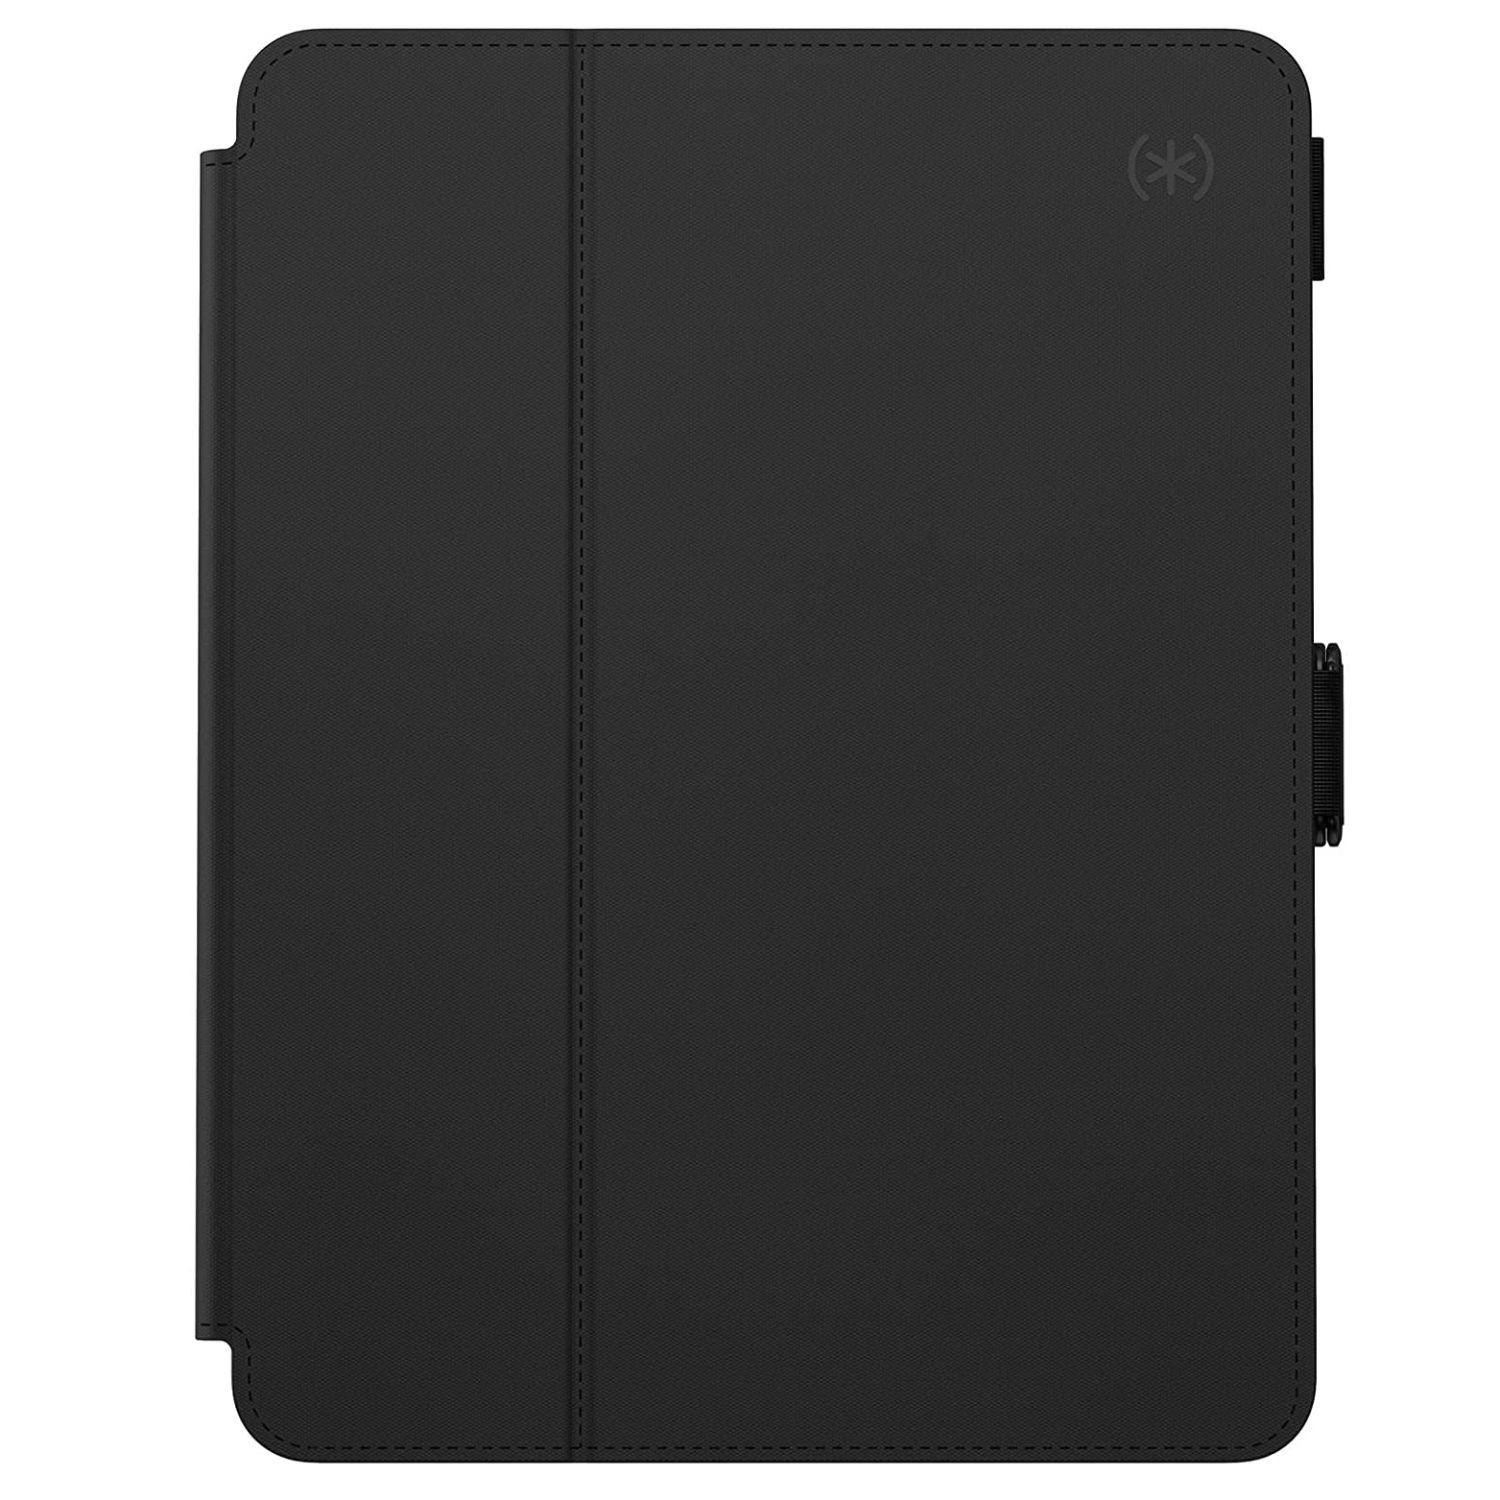 Speck Balance Folio Case for iPad Air (4th and 5th Generation)